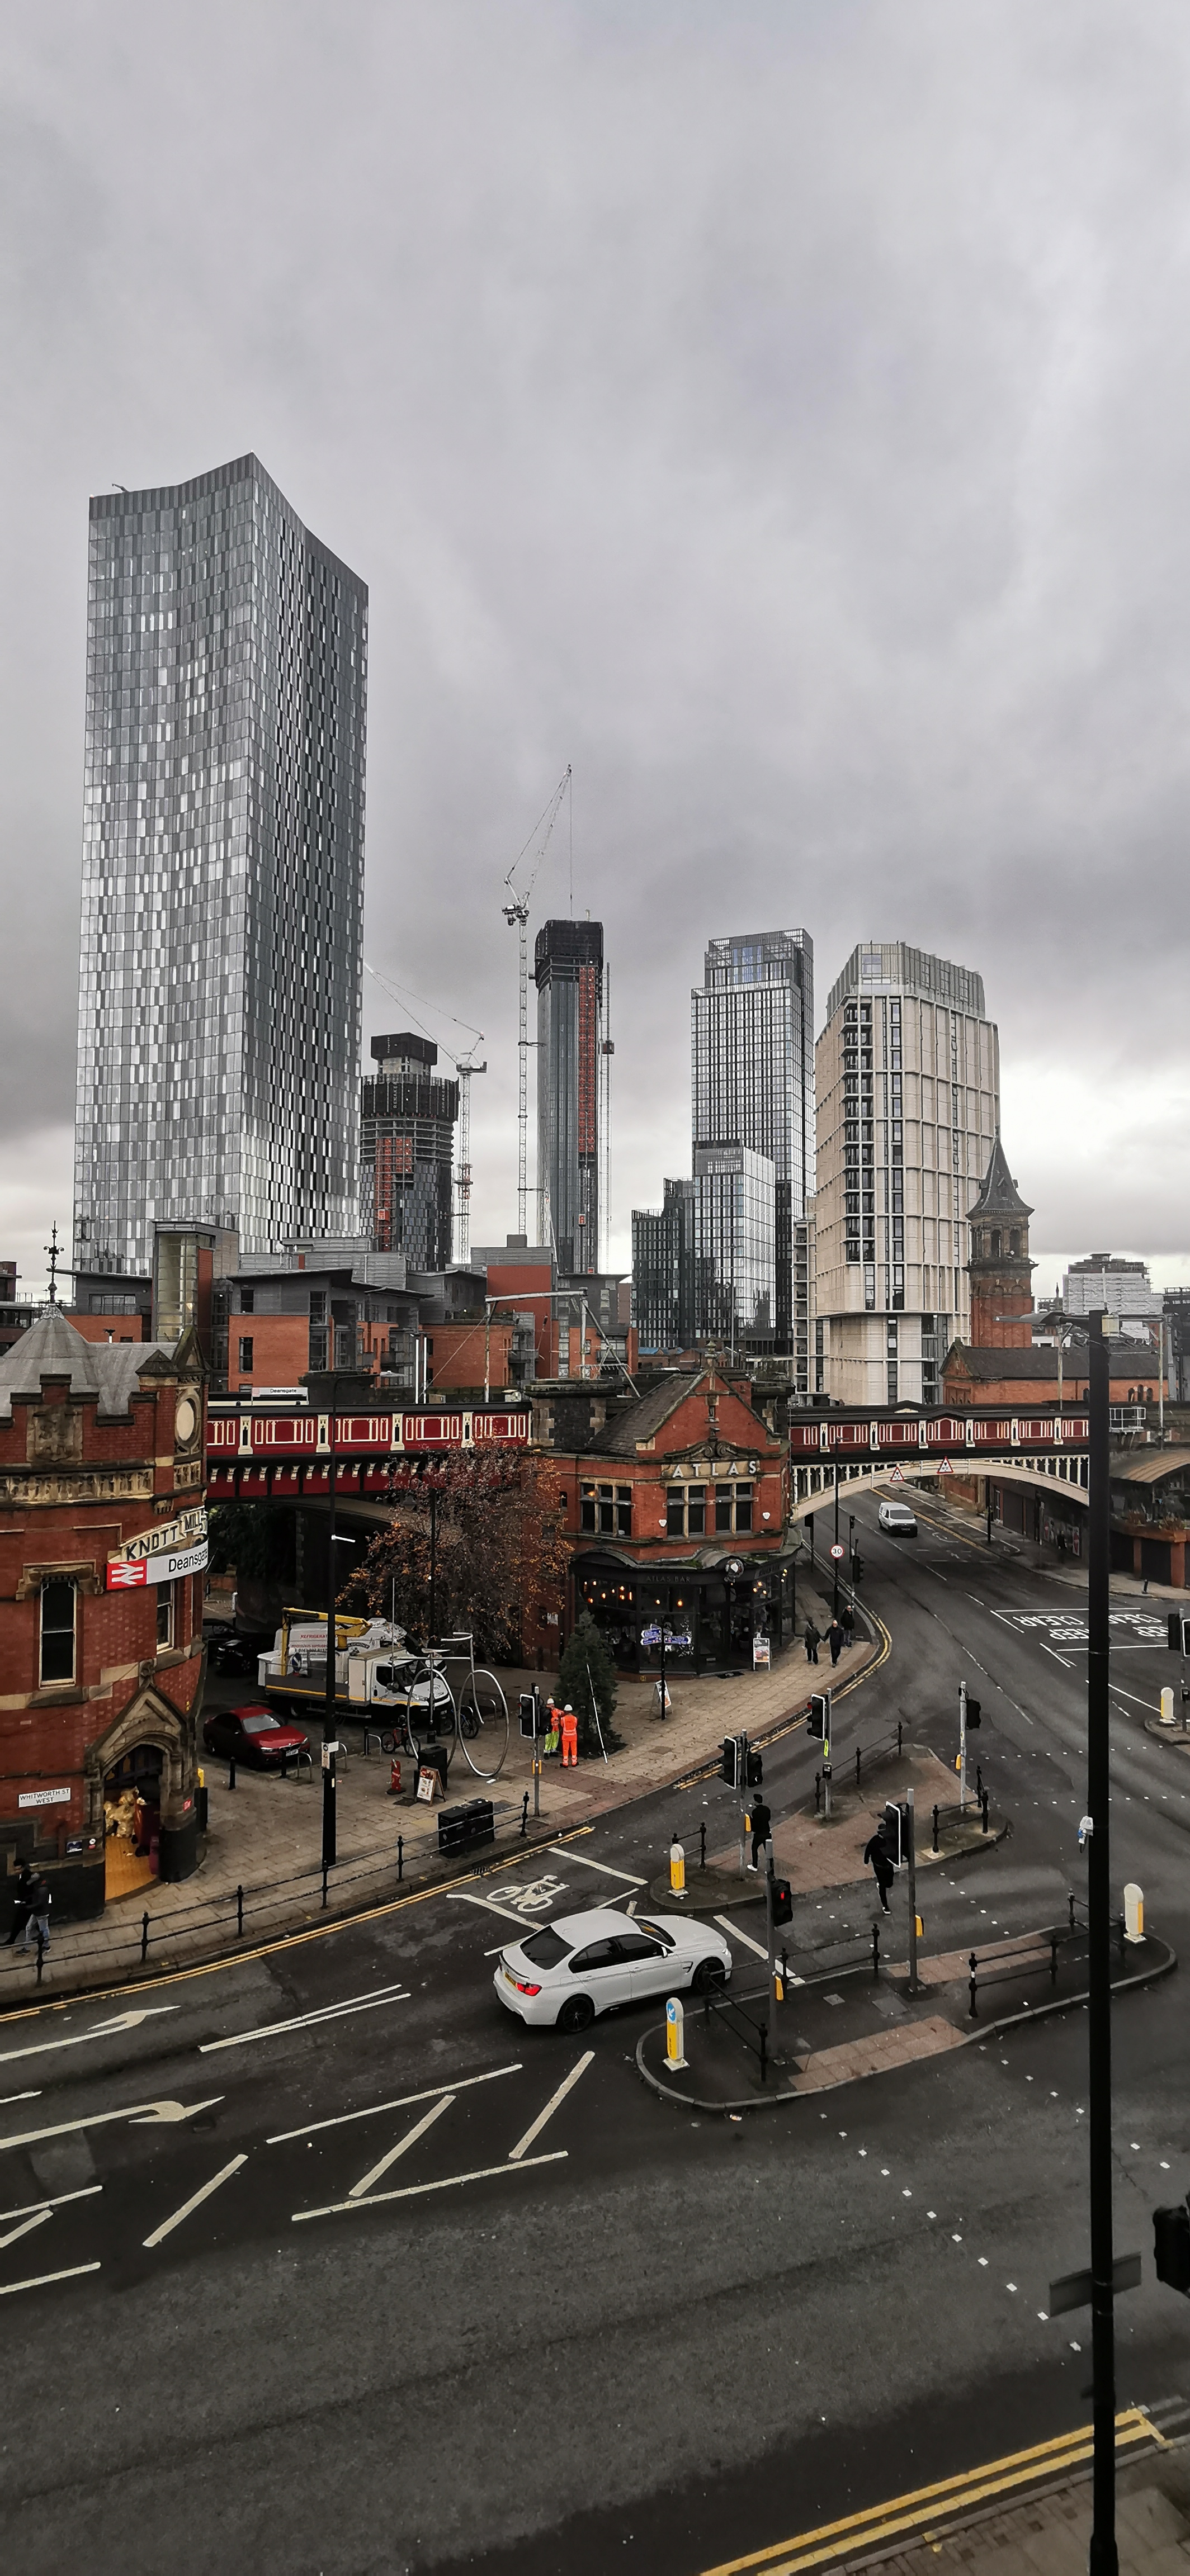 Photo taken between Deansgate Station and Deansgate Castlefield Tram Stop